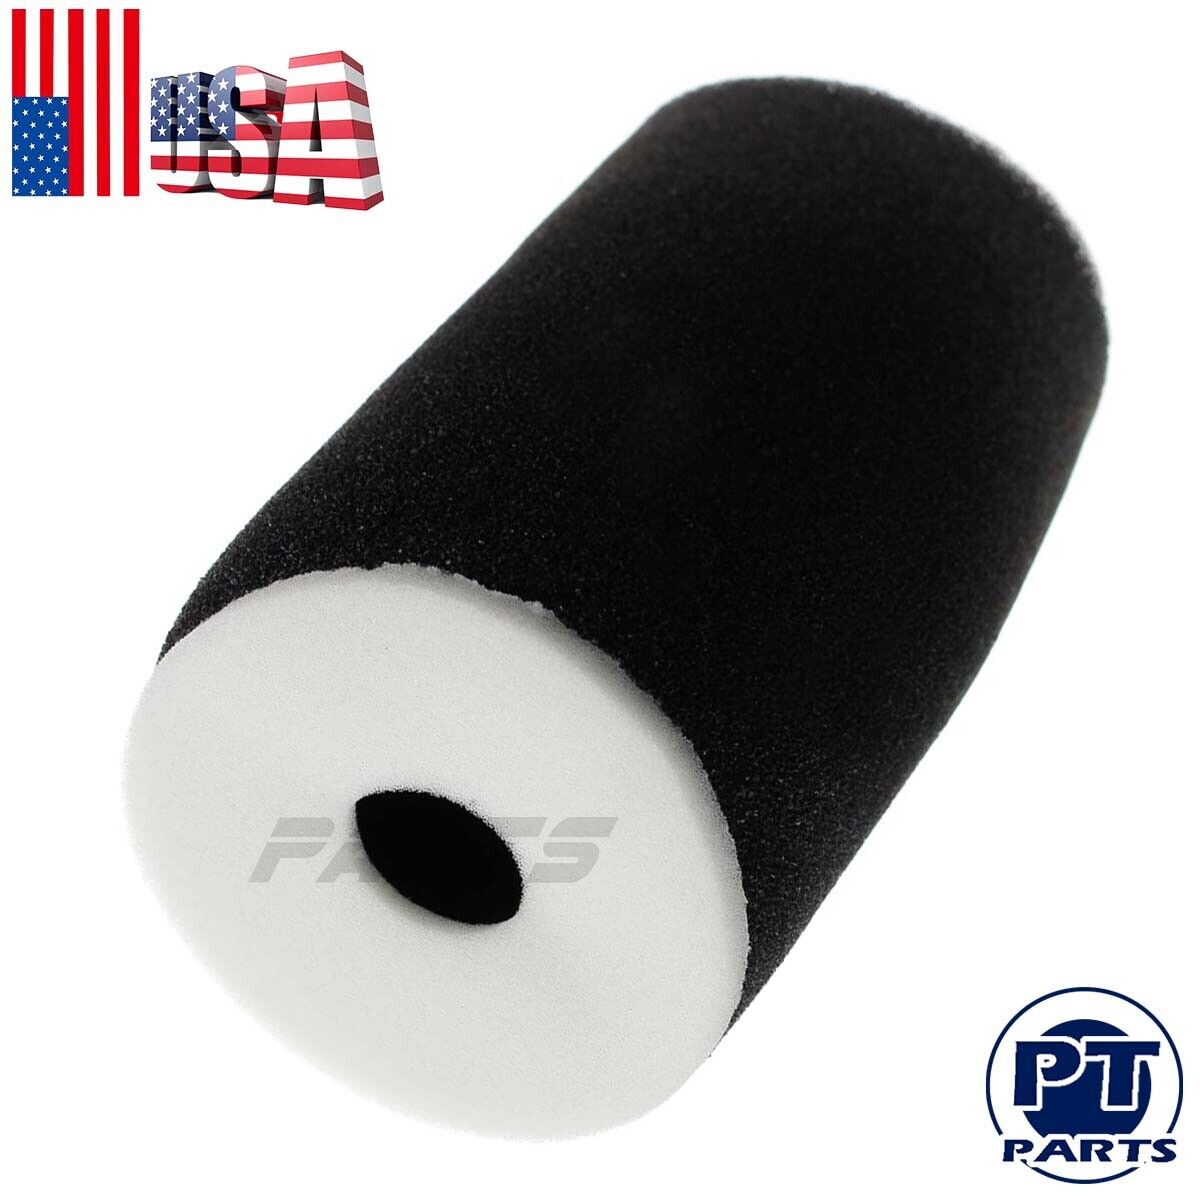 New Air Filter For Yamaha Big Bear Raptor Warrior Wolverine 350 Grizzly 600 660